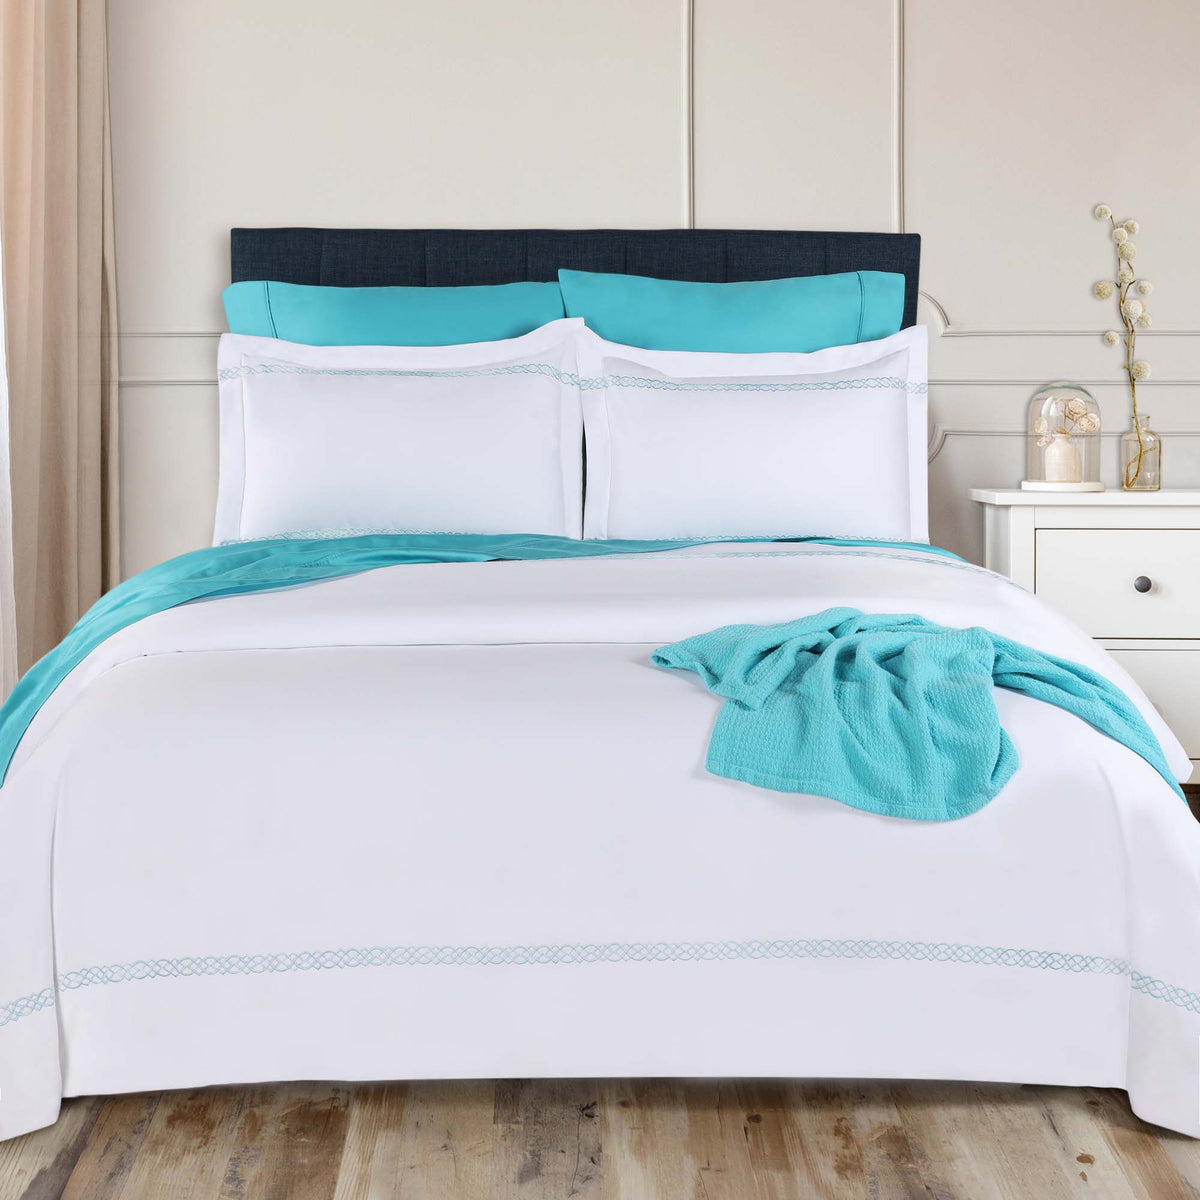 1000 Thread Count Egyptian Cotton Embroidered Duvet Cover Set - White/Blue